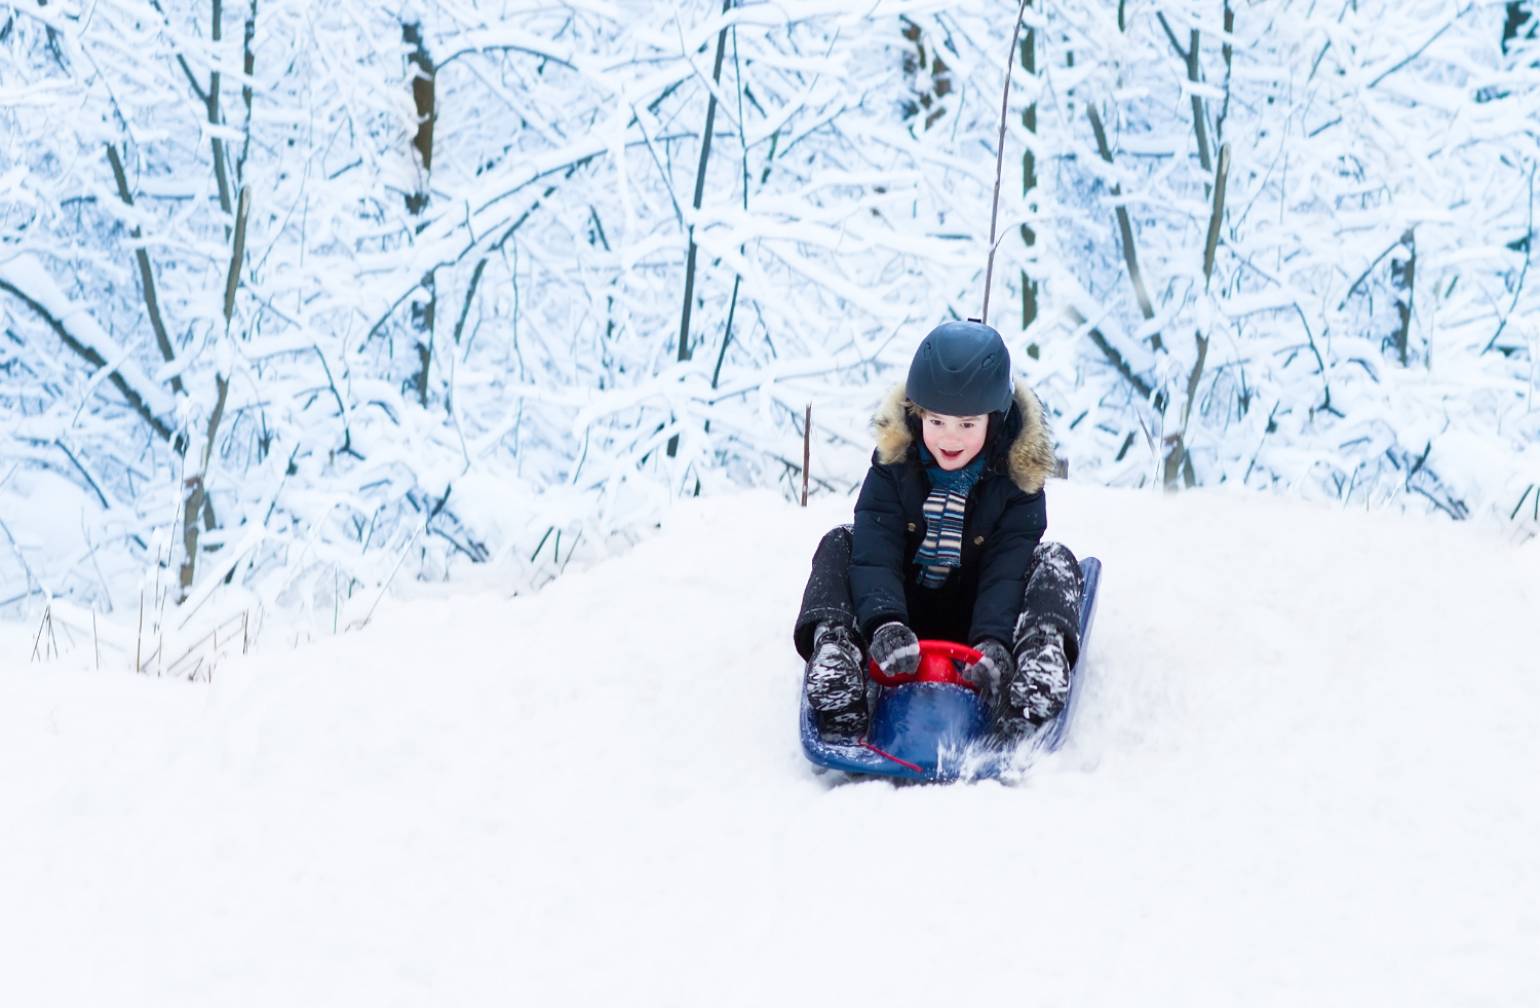 Boy sledding in the snow during winter.